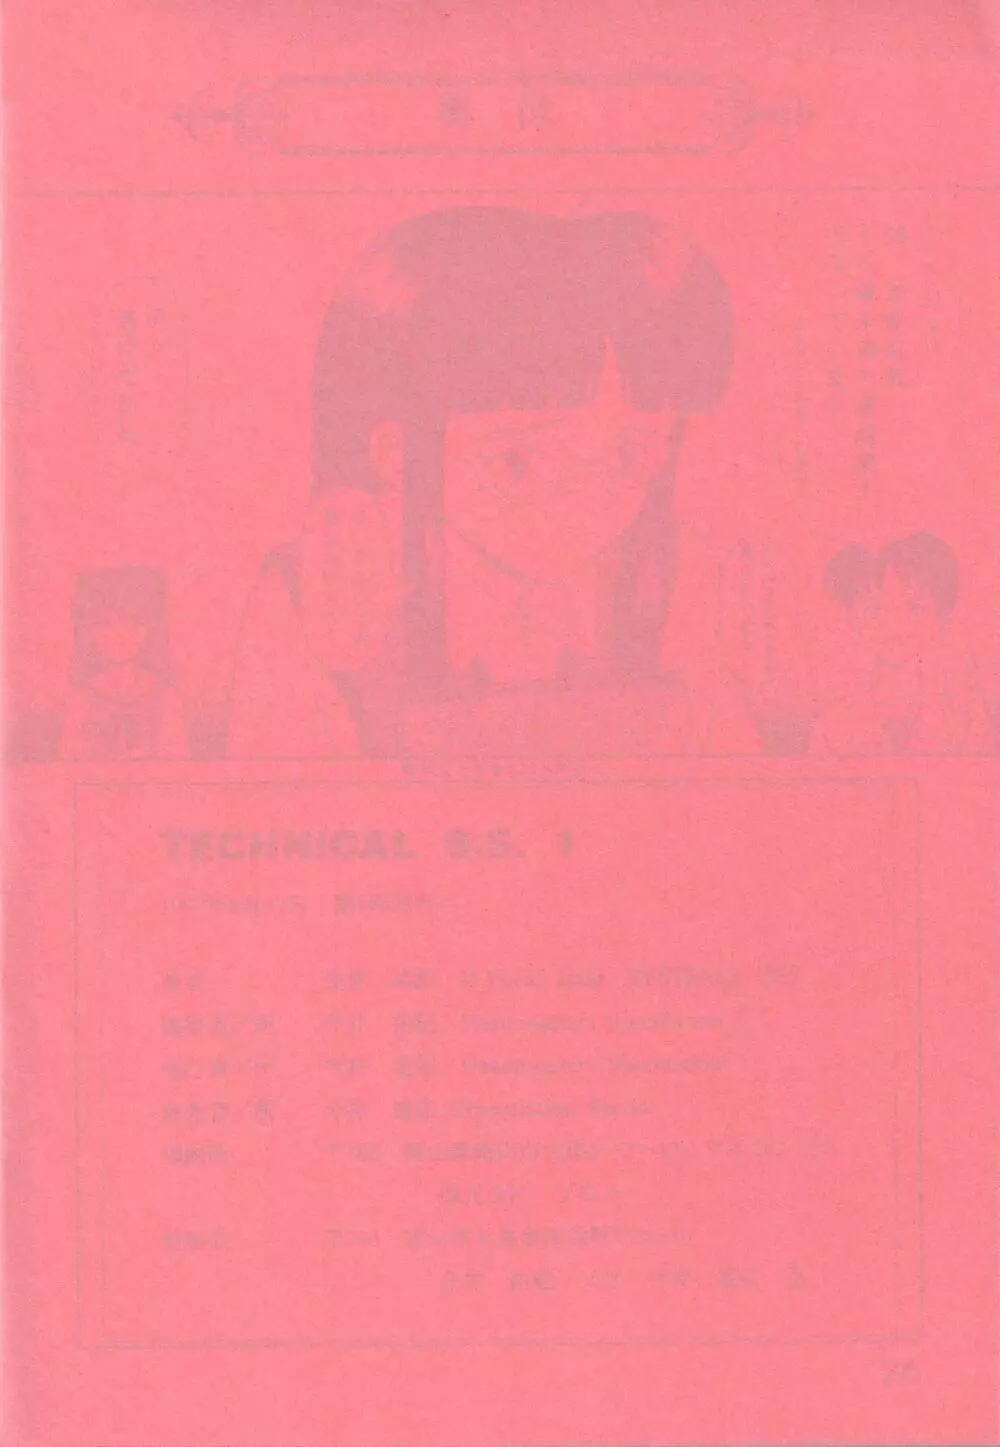 TECHNICAL S.S. 1 2nd Impression Page.29